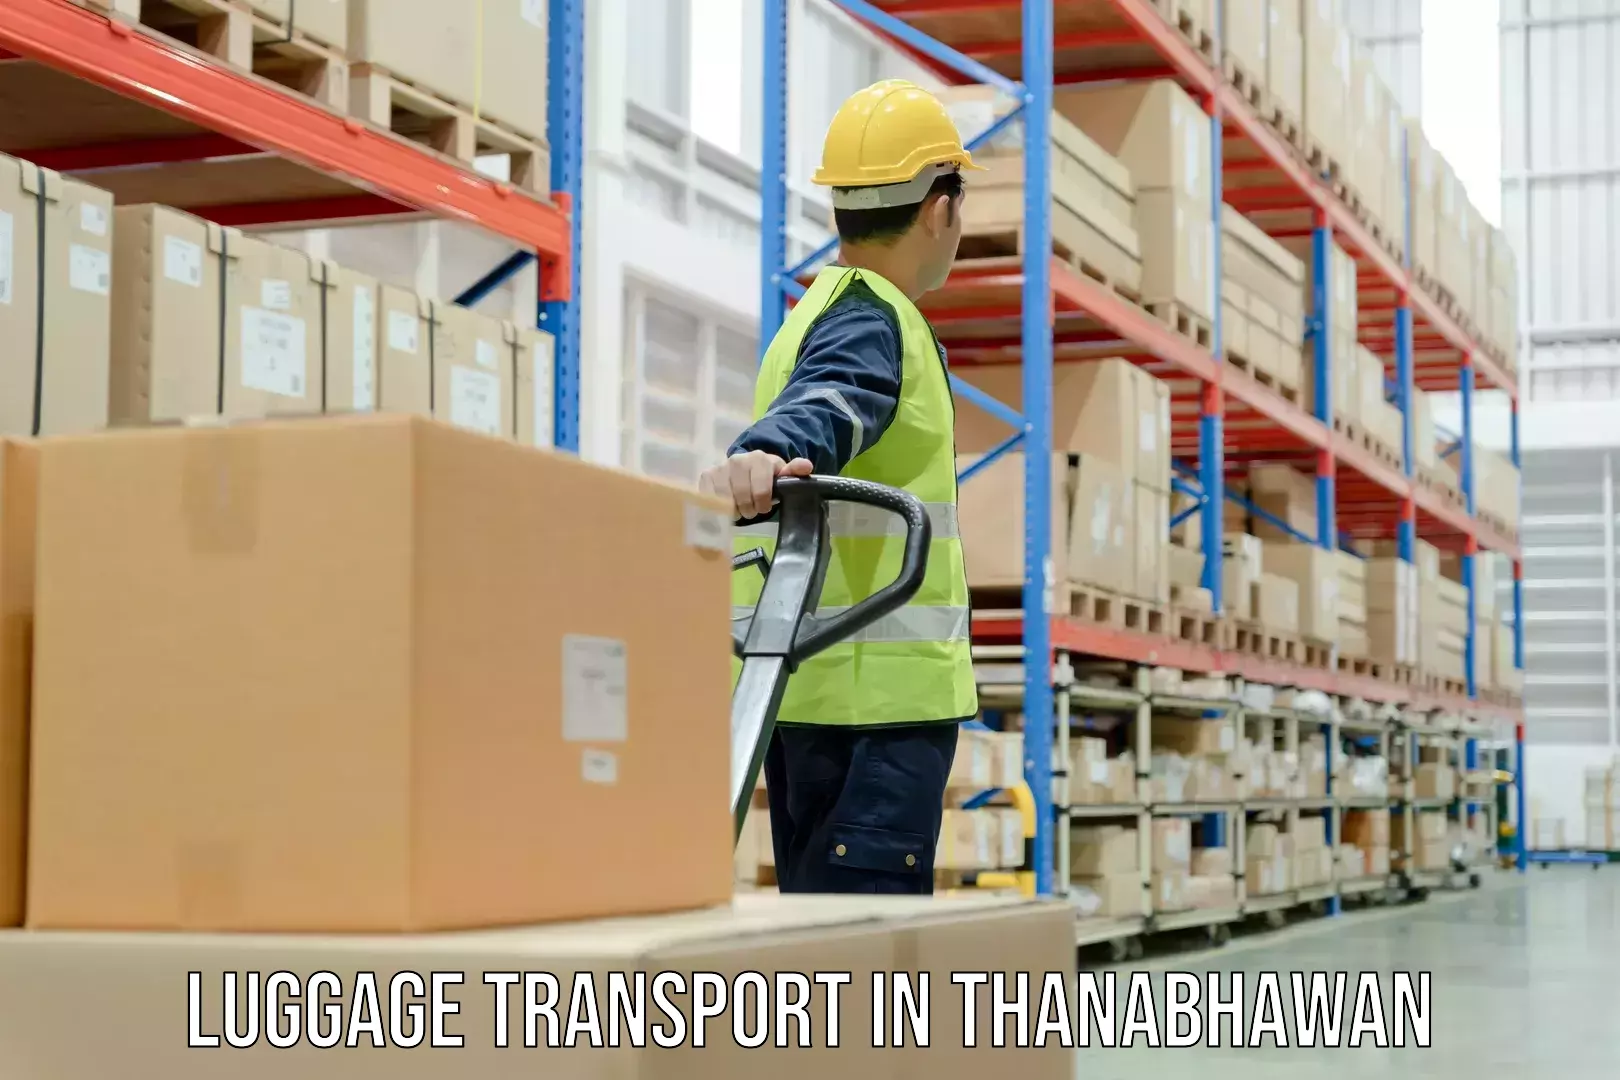 Luggage transport guidelines in Thanabhawan